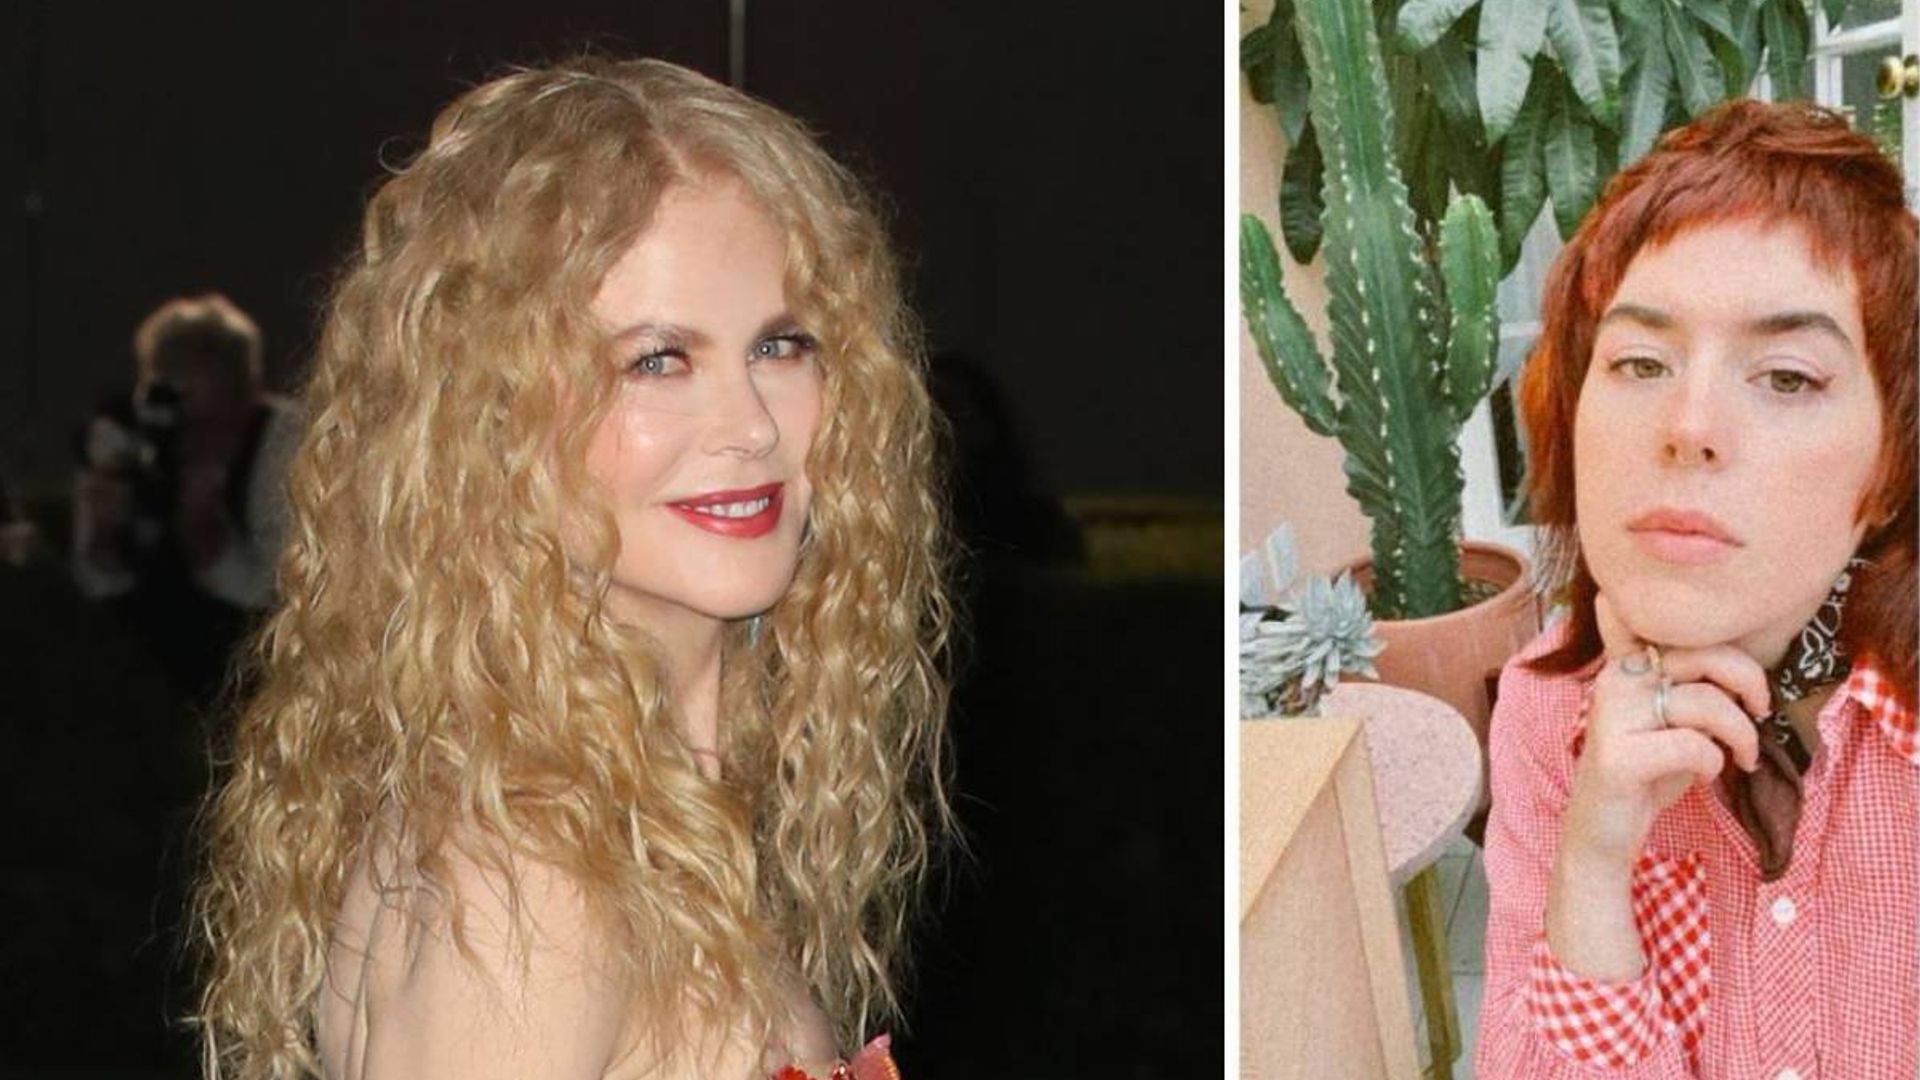 Nicole Kidman and Bella Cruise have mother-daughter moment as she shows support for famous mom K